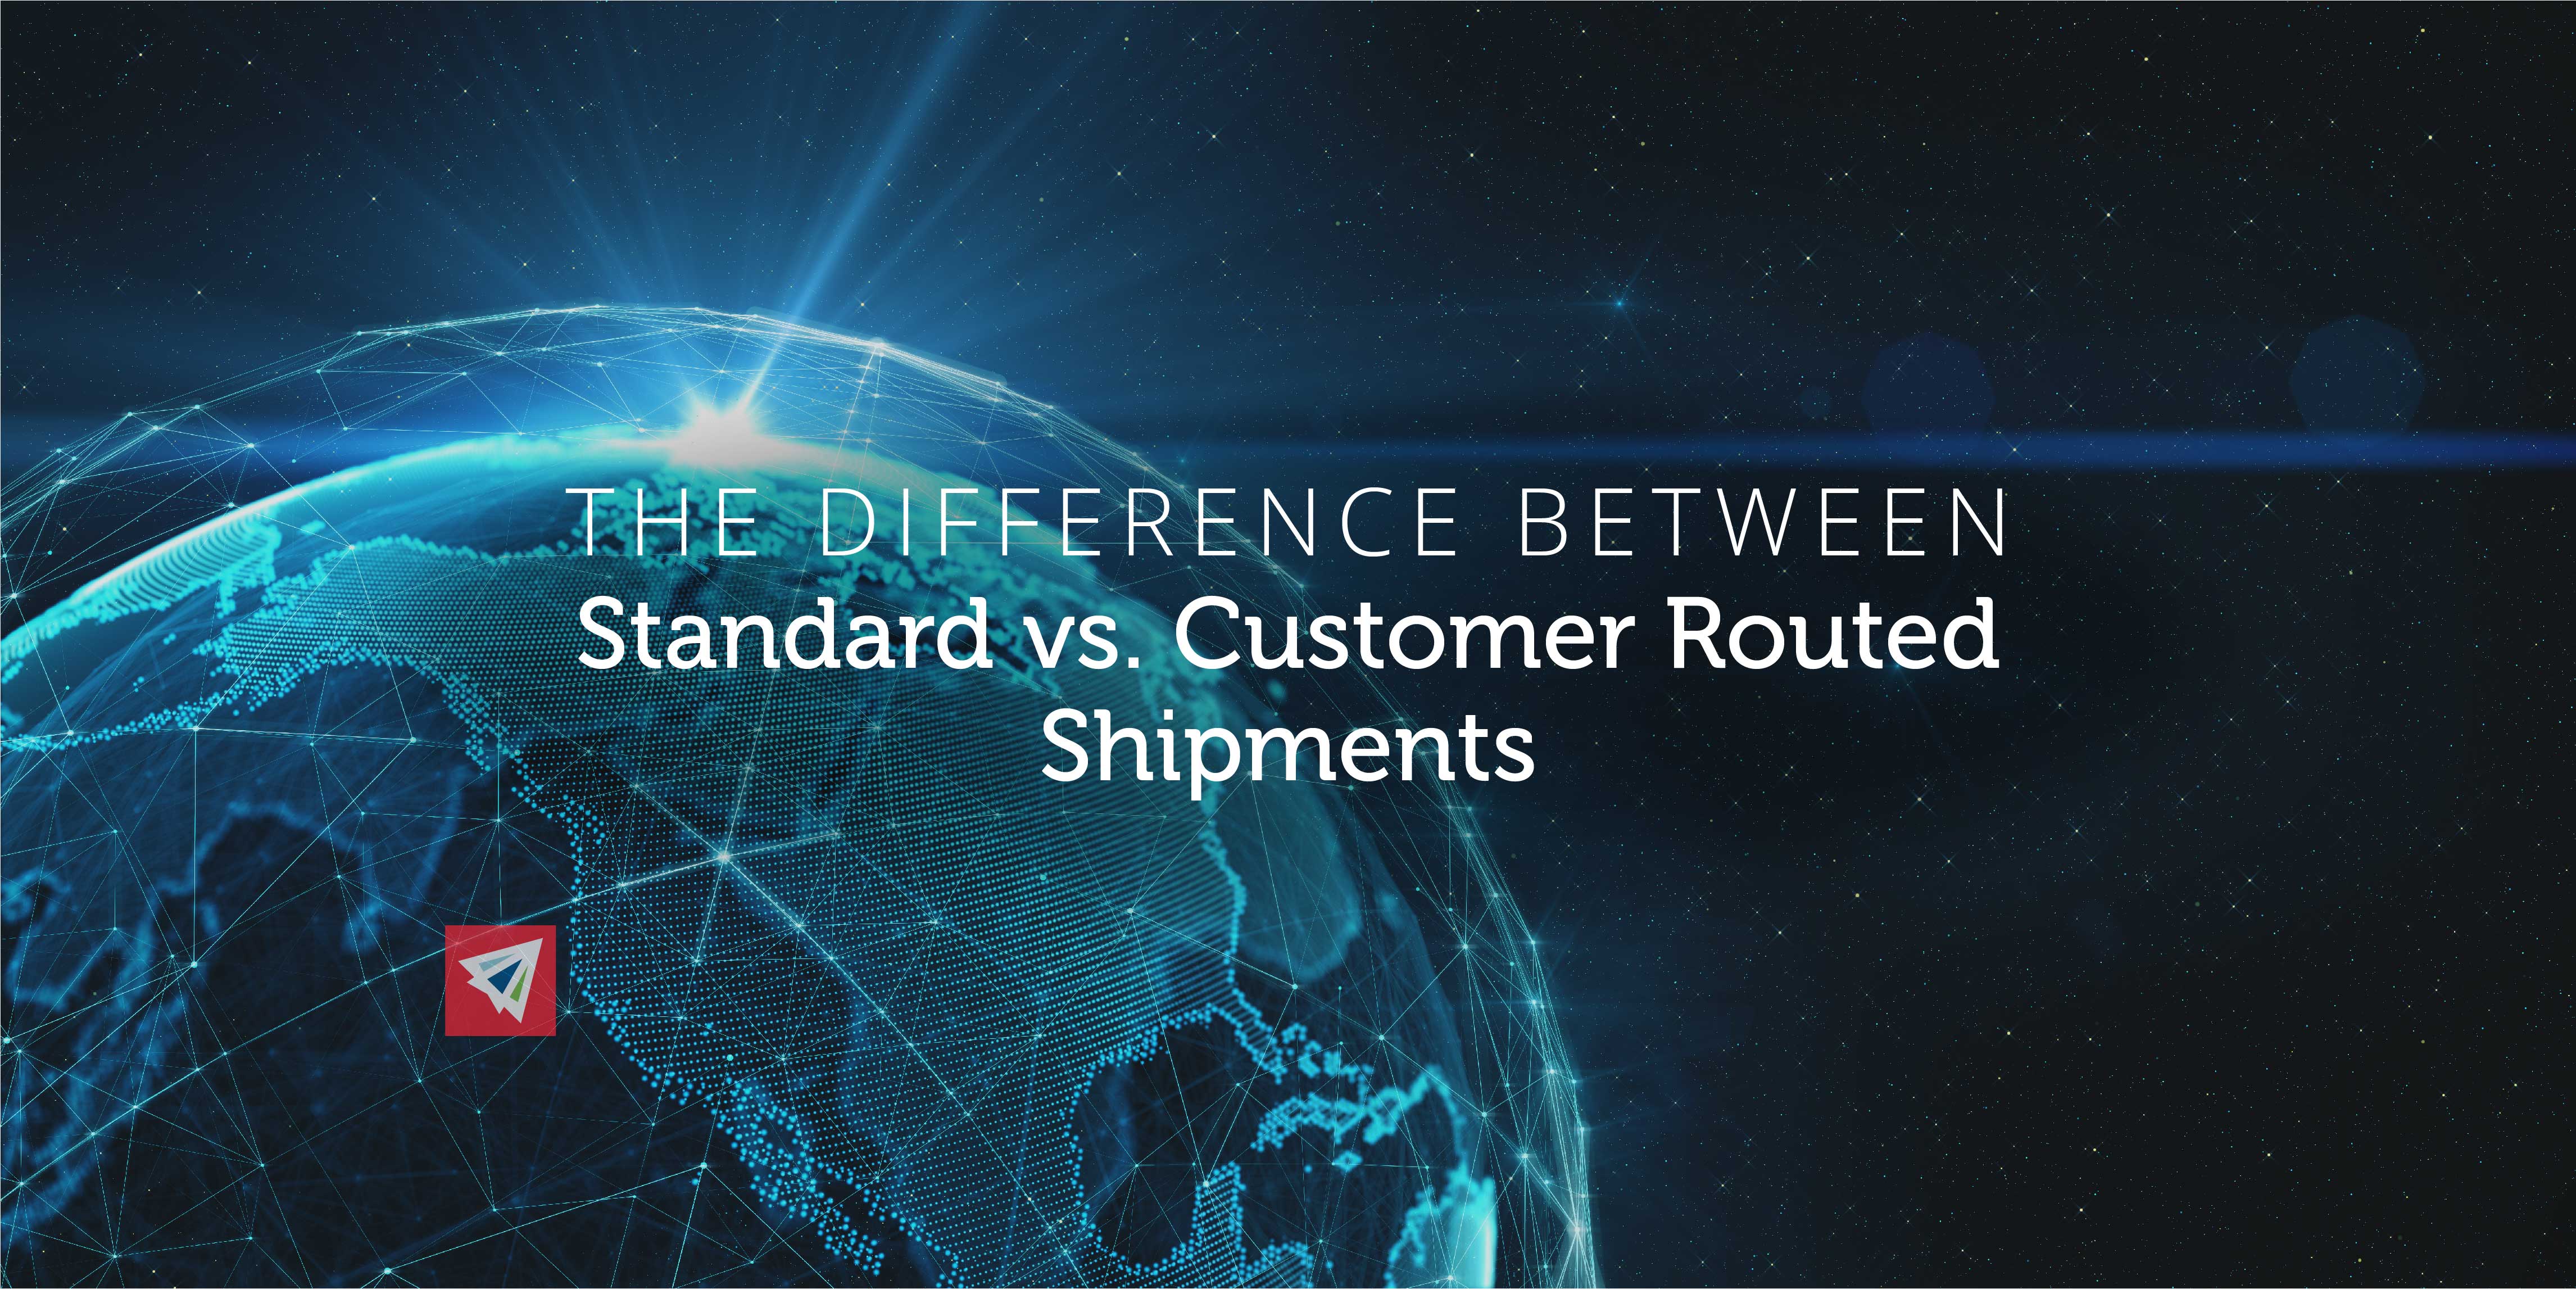 Difference Between Standard vs. Customer Routed Shipments